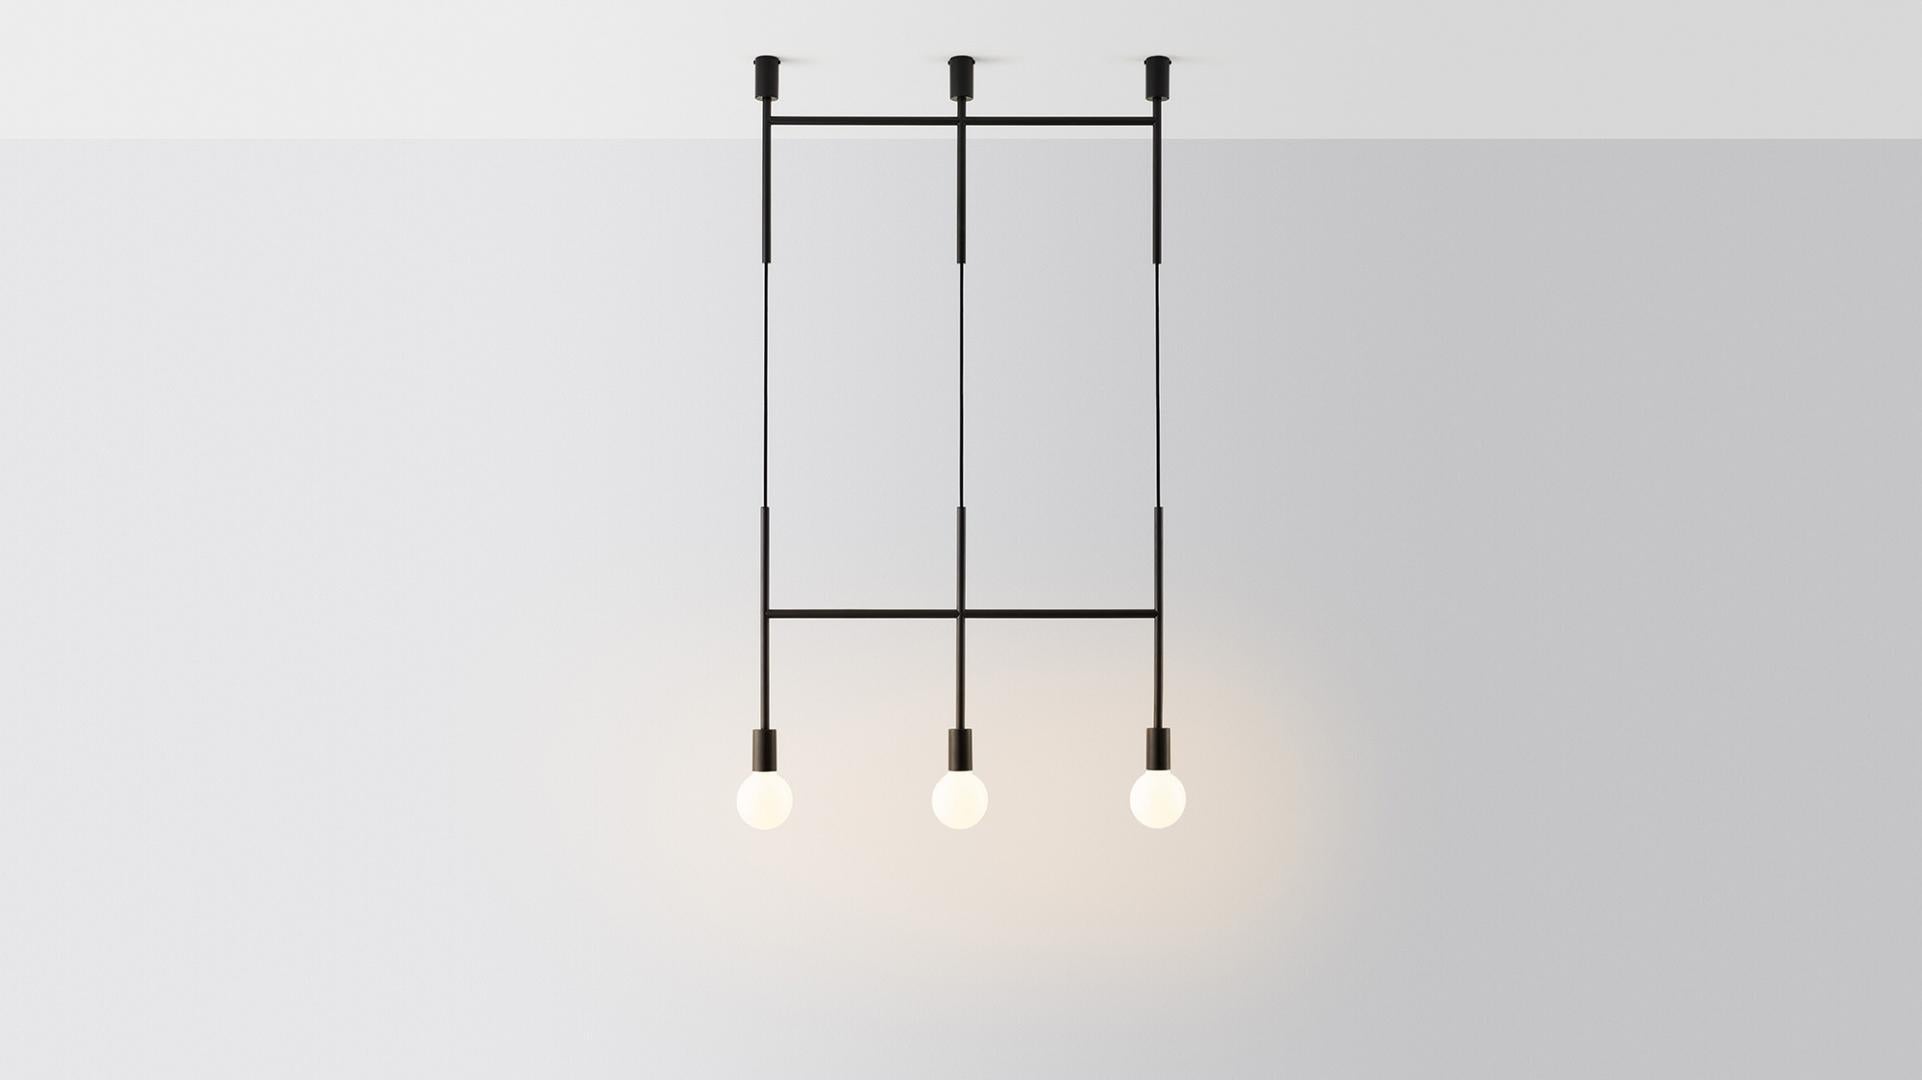 Triple step pendant light by Volker Haug
Dimensions: W 98.7 x H 108 cm 
Material: brass. 
Finishes: polished, aged, brushed, bronzed, blackened, or plated
Cord: Fabric or metal
Lamp: Opal G95 LED (E26/E27 110 - 240V, 12V version